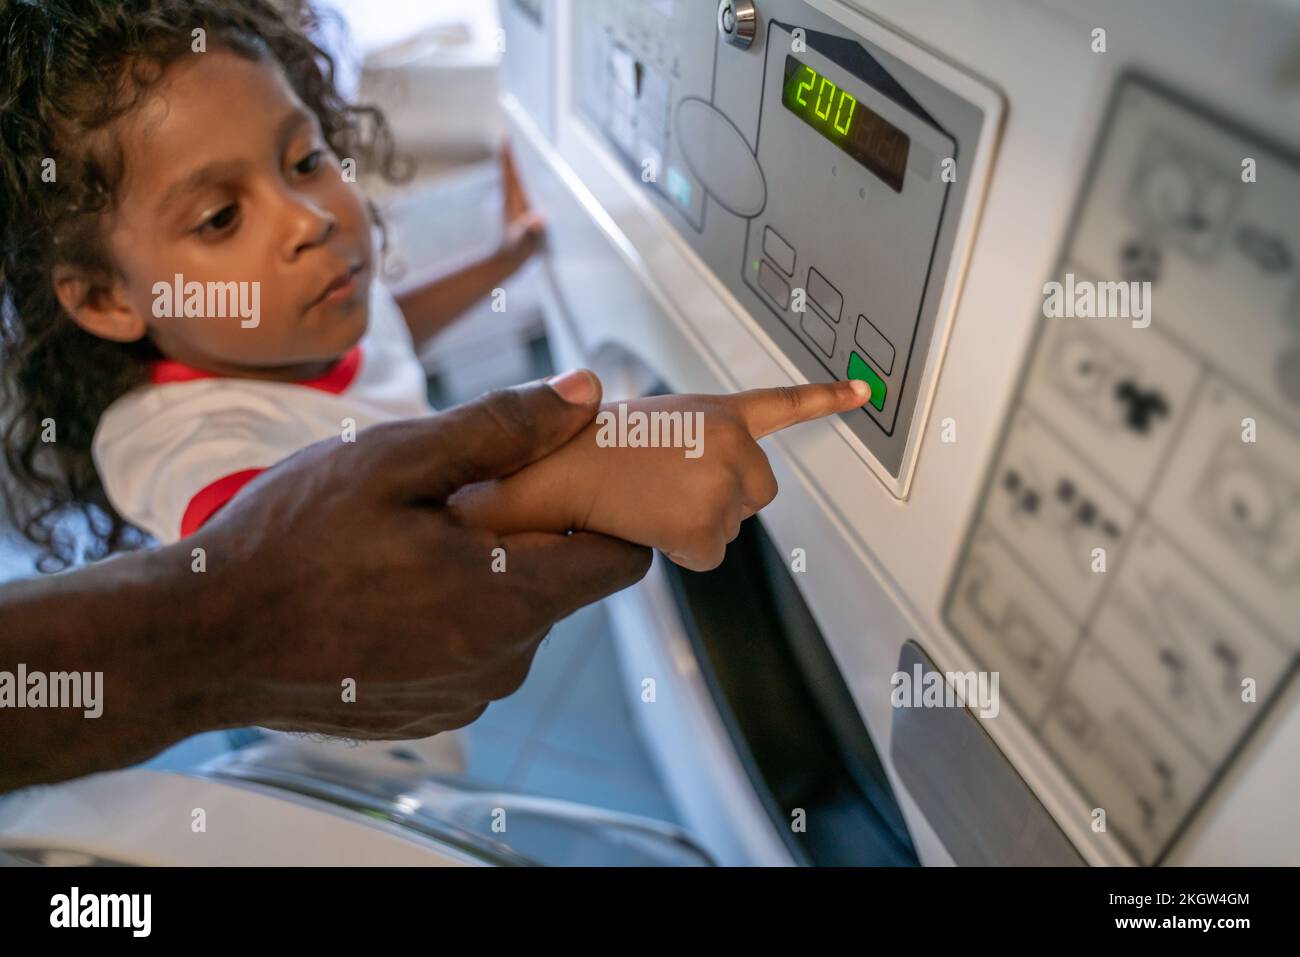 Serious child selecting the right settings on a washer Stock Photo